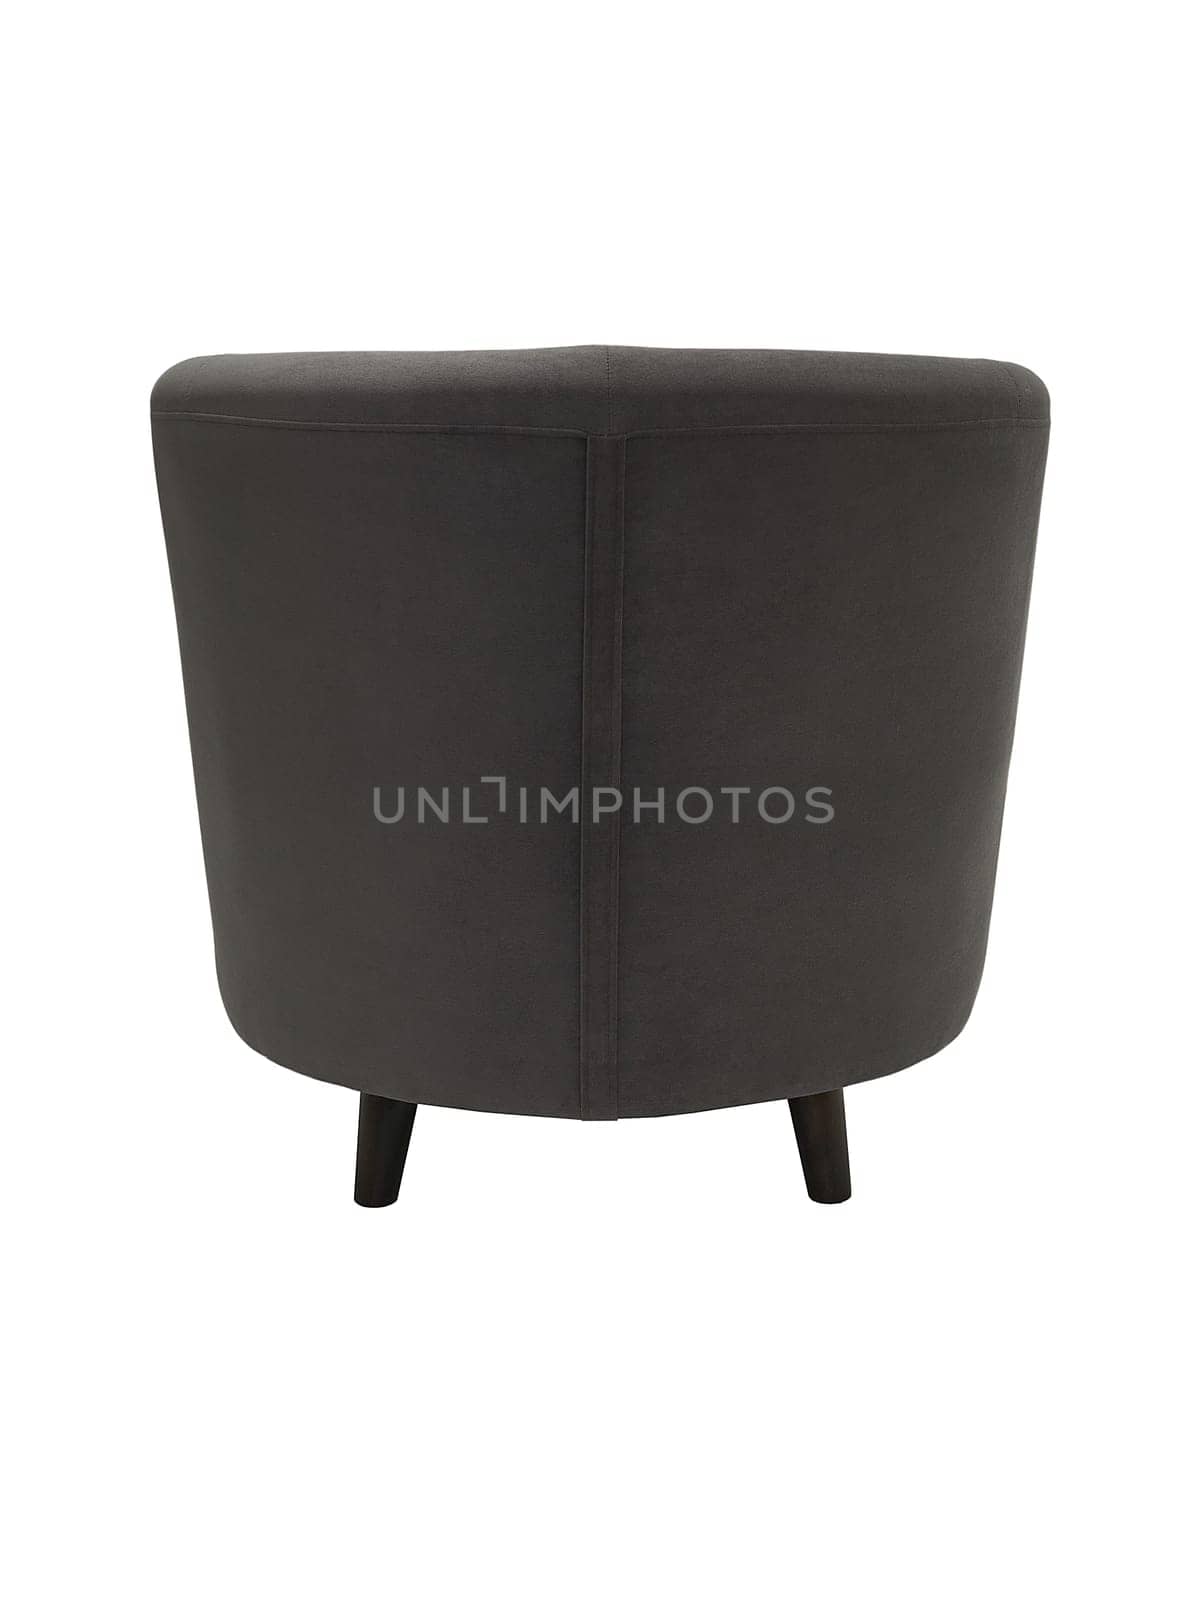 modern gray fabric armchair with wooden legs isolated on white background, back view.